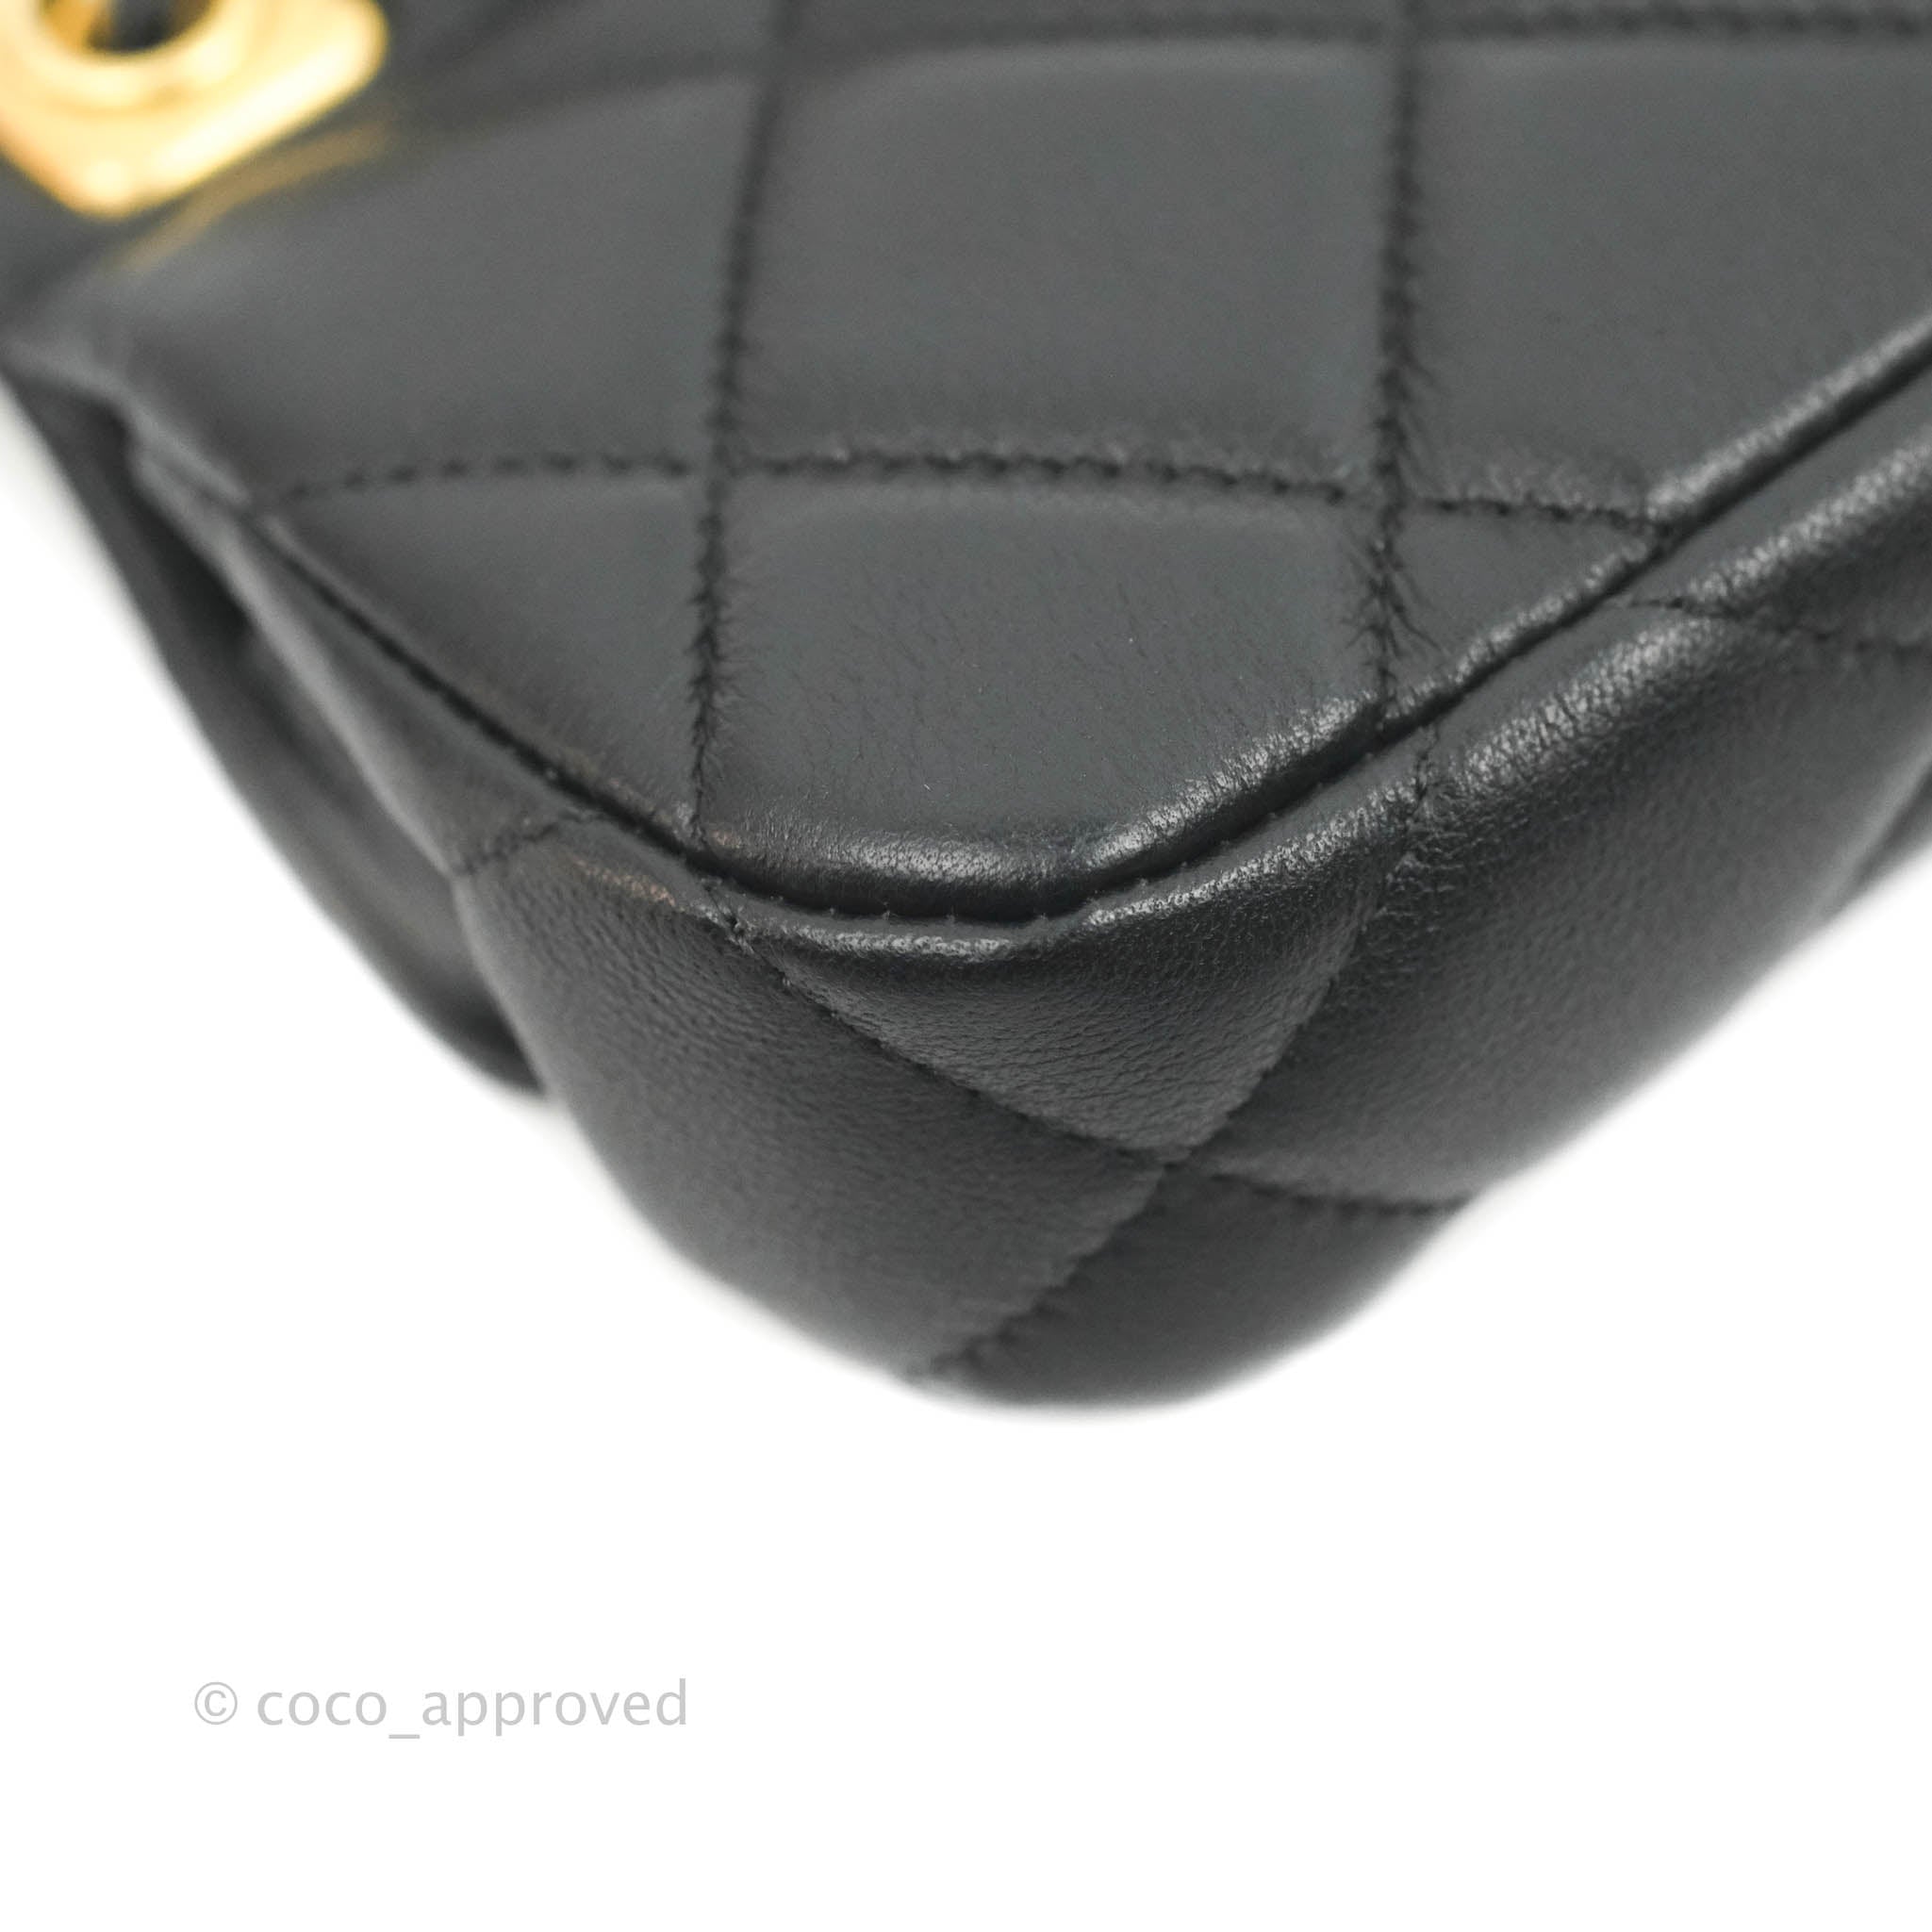 Chanel - Classic Key Holder Embossed Quilted Calfskin Noir